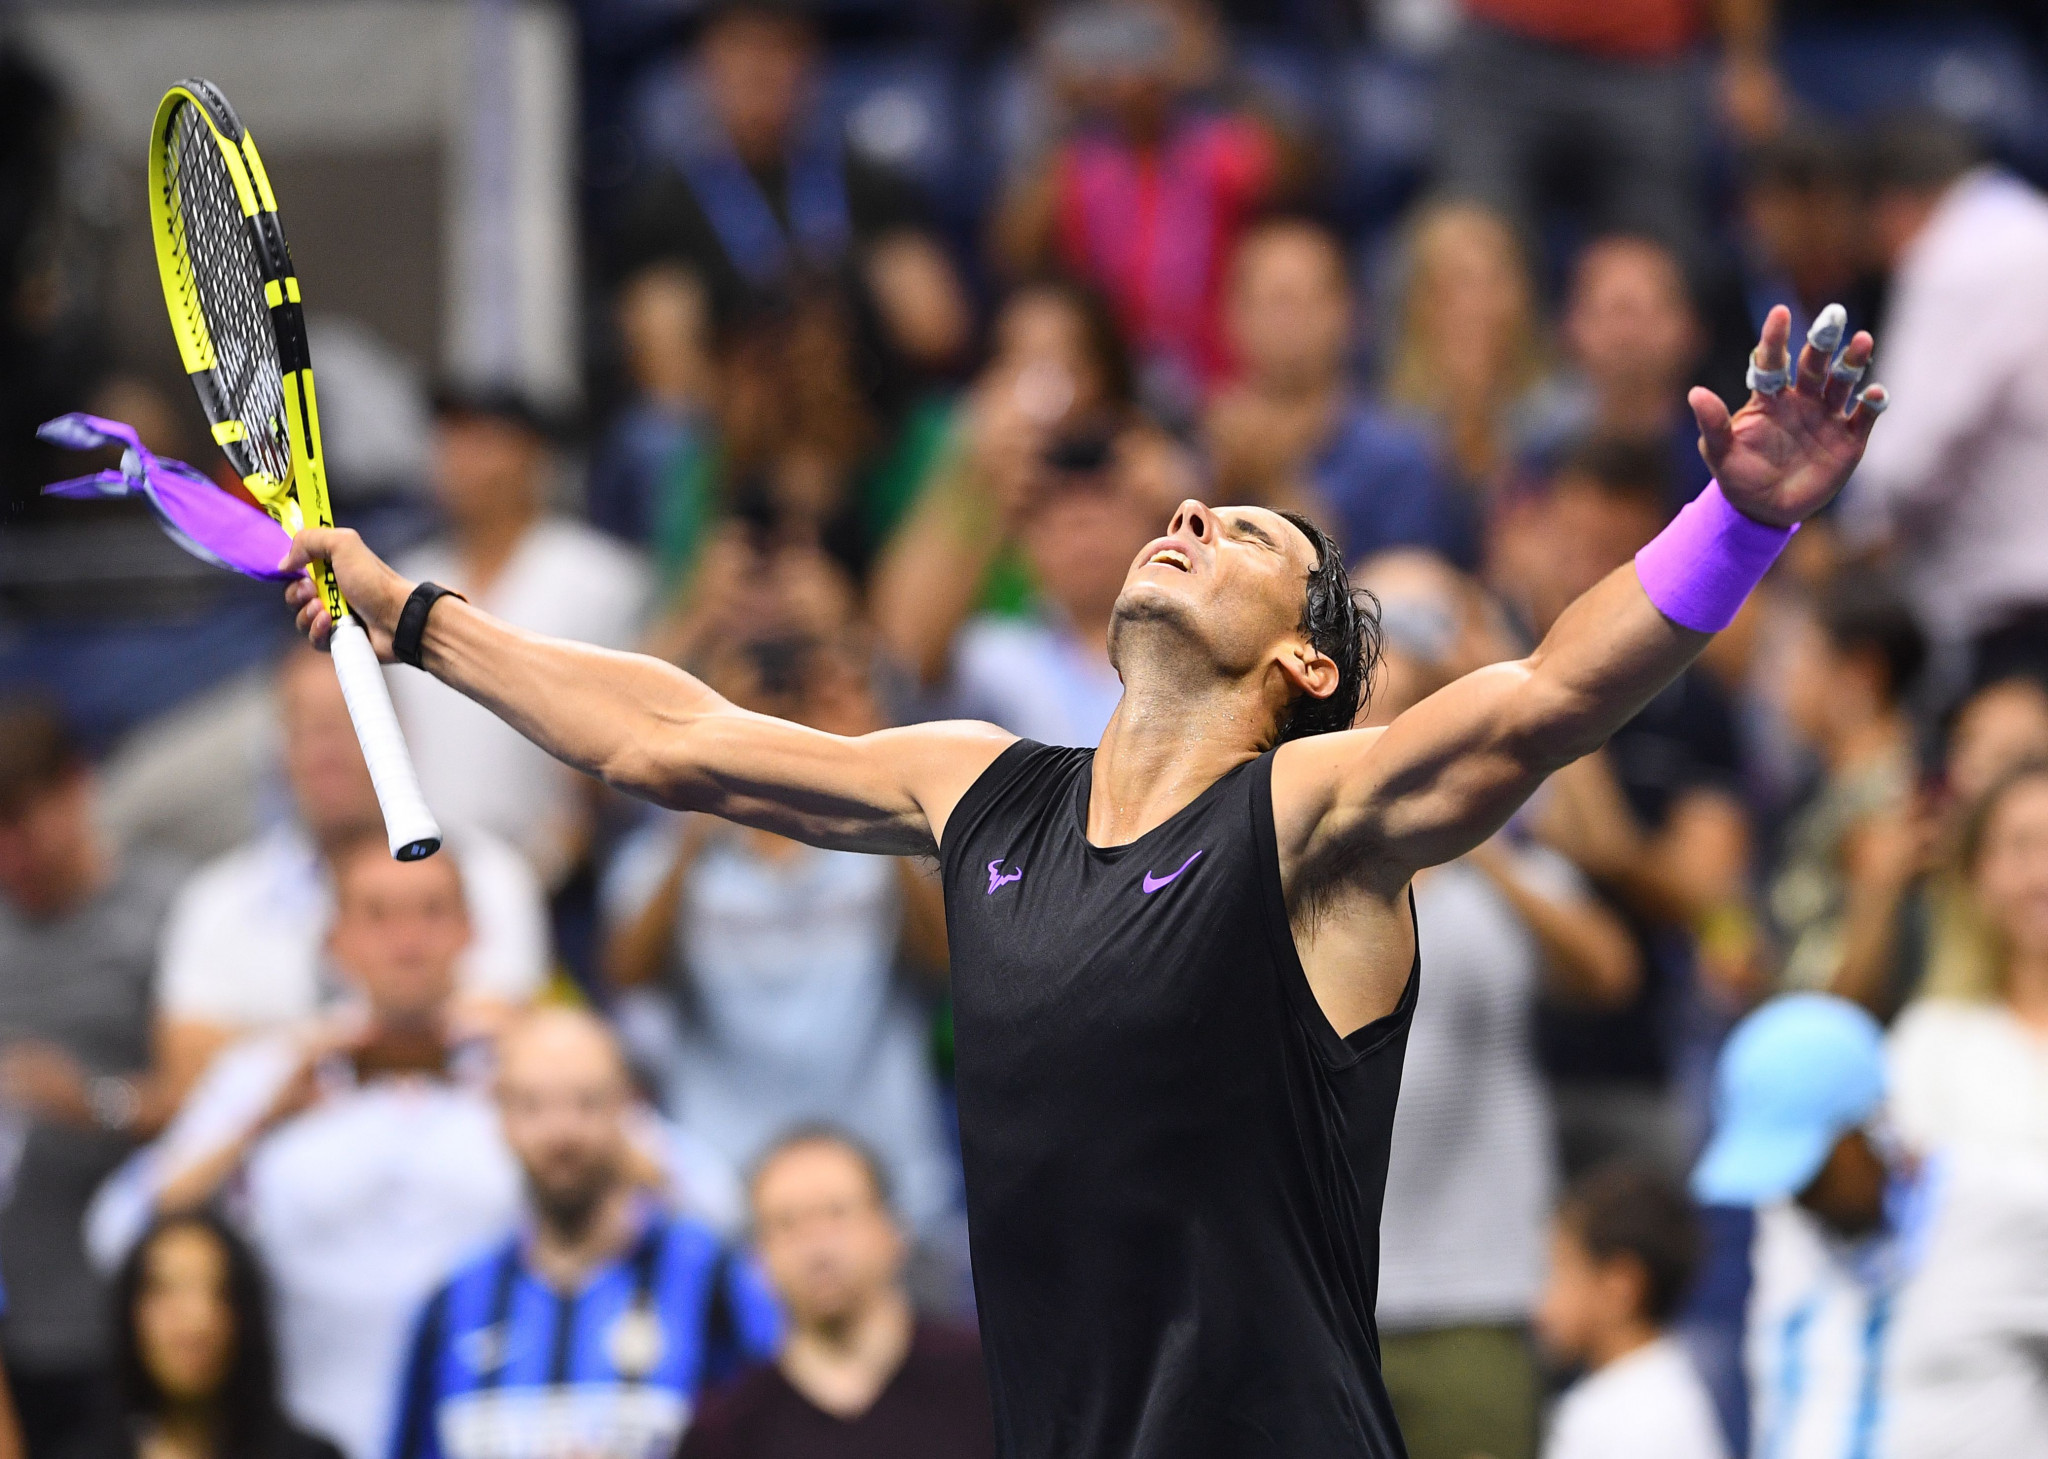 Nadal beats Schwartzman in straight sets to remain on track for fourth US Open